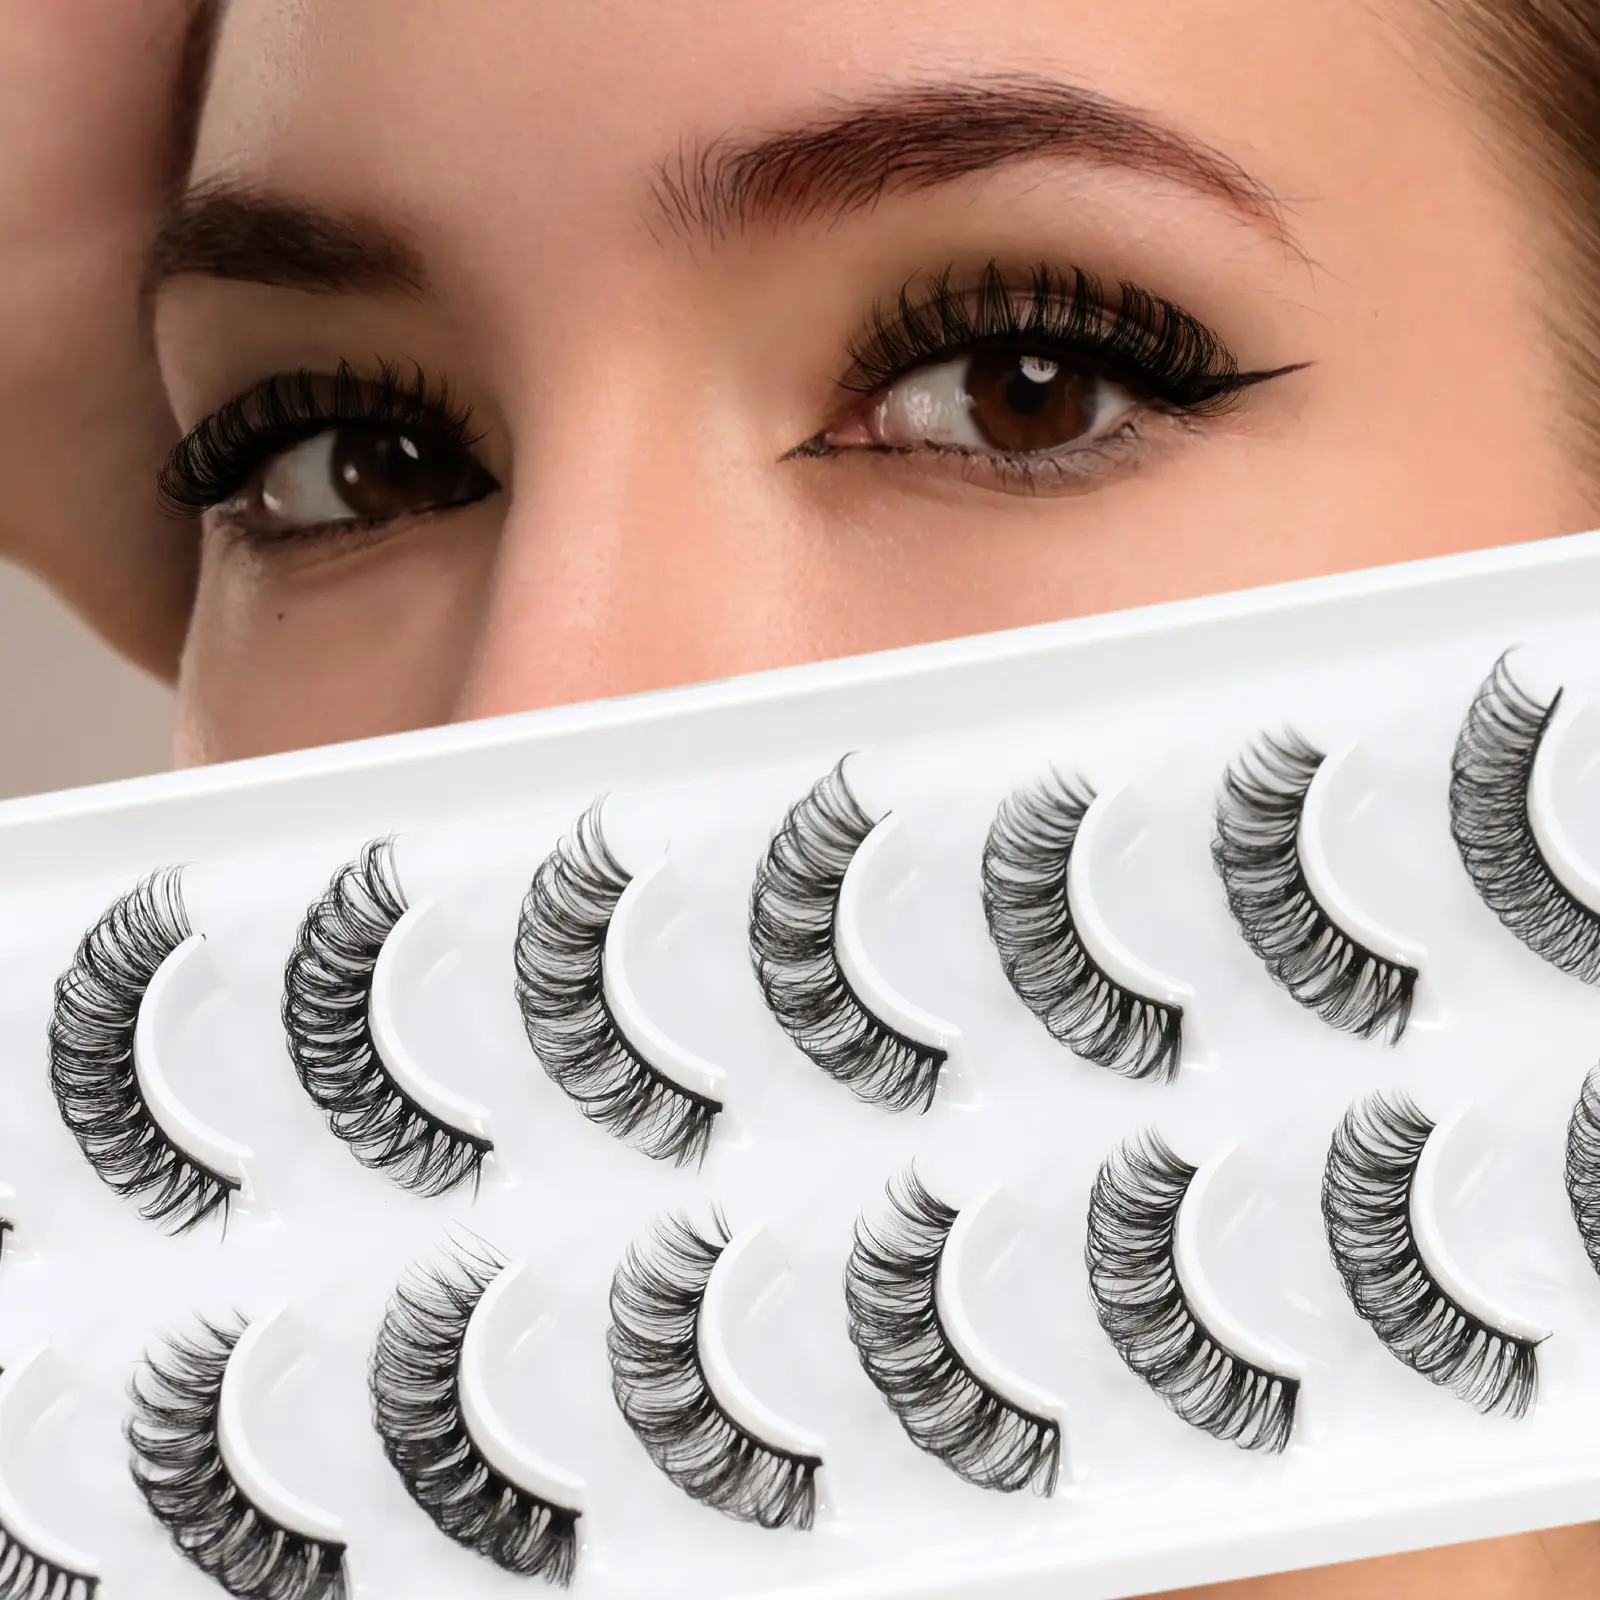 Russian strip lashes High quality Good looking effect Easy to apply Cost effective